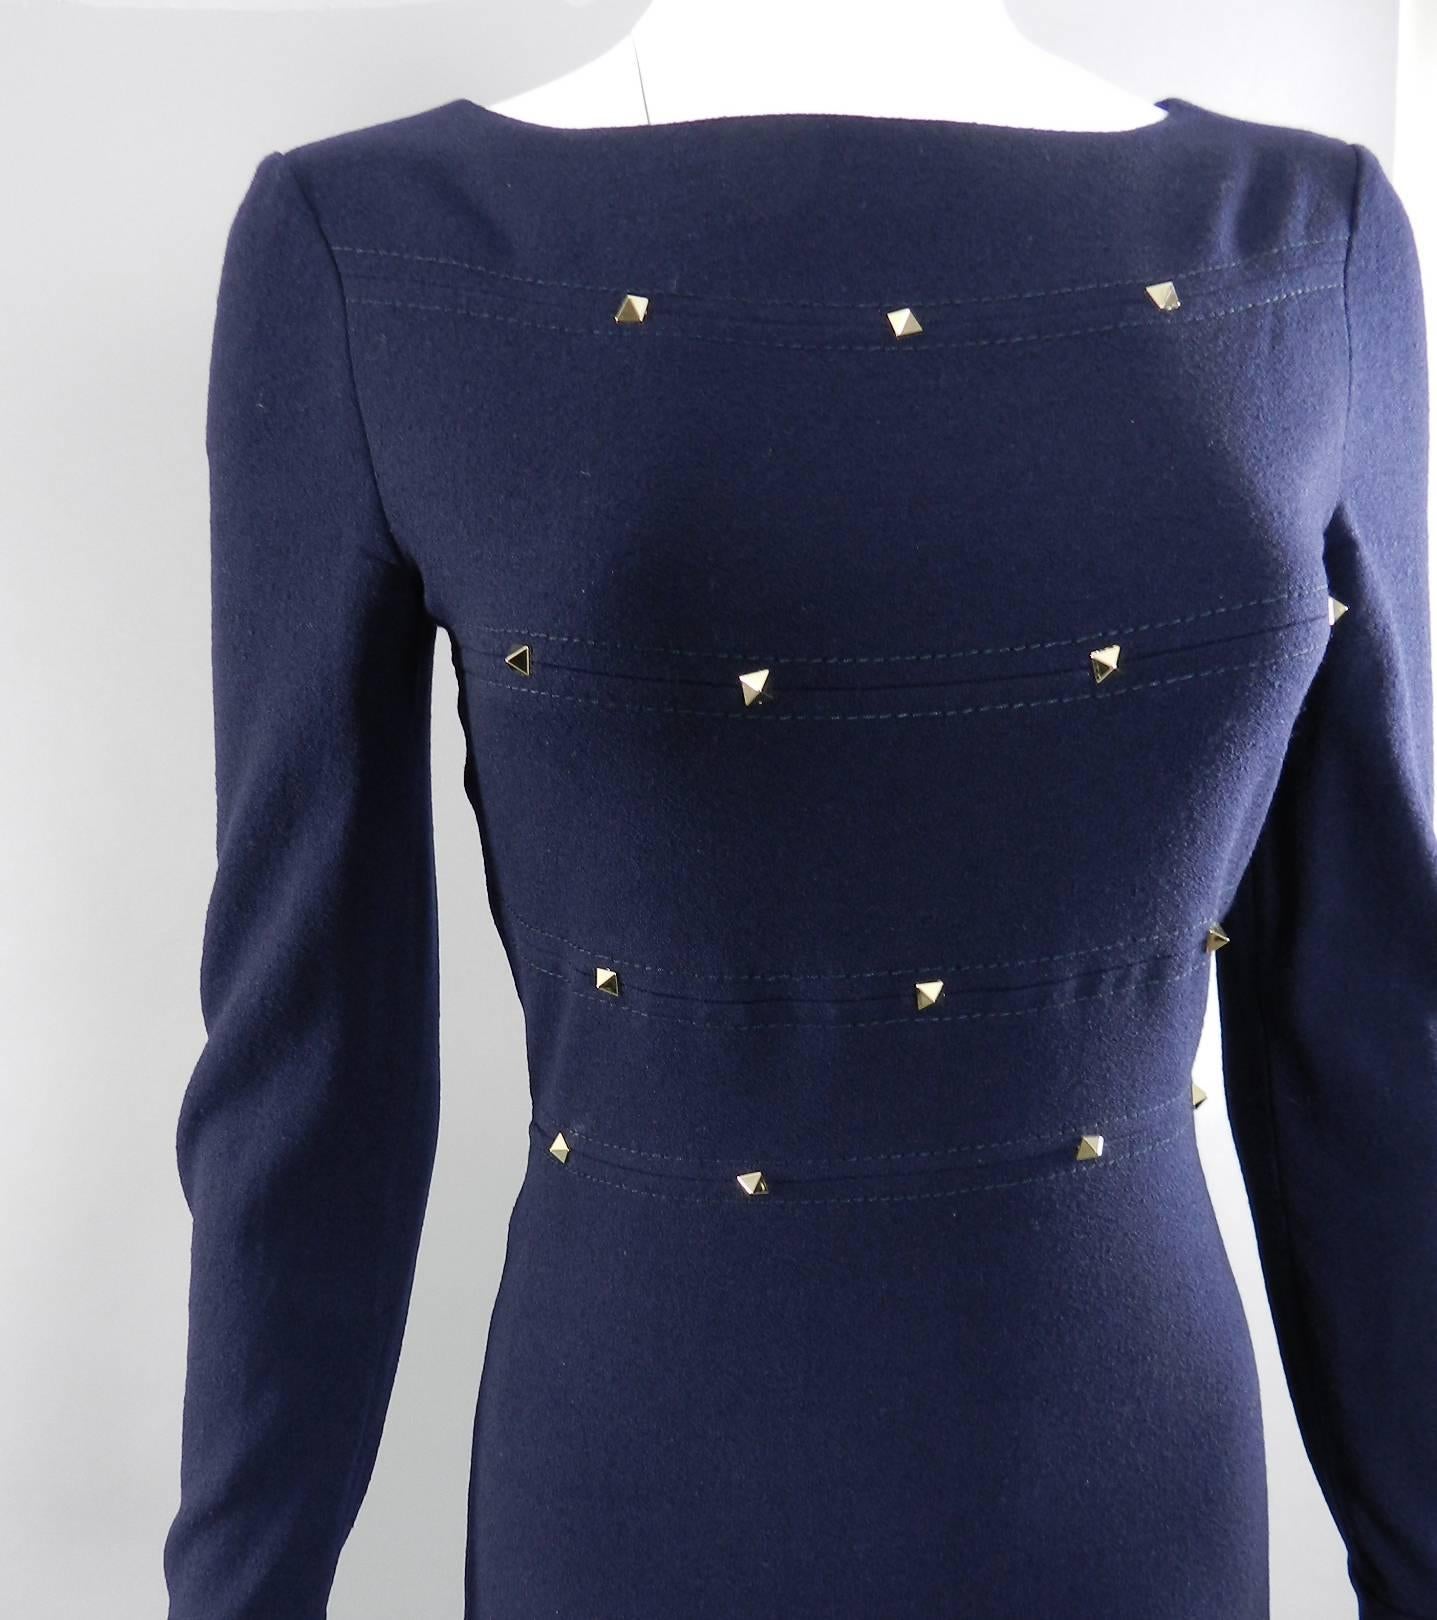 Valentino navy dress with gold rock stud decoration. Centre back zipper, long sleeves, lined.  Excellent clean pre-owned condition - worn once.  Size USA 6. To fit 34" at bust, 28-29" waist, 37-38" hip, shoulder seams 15", sleeve